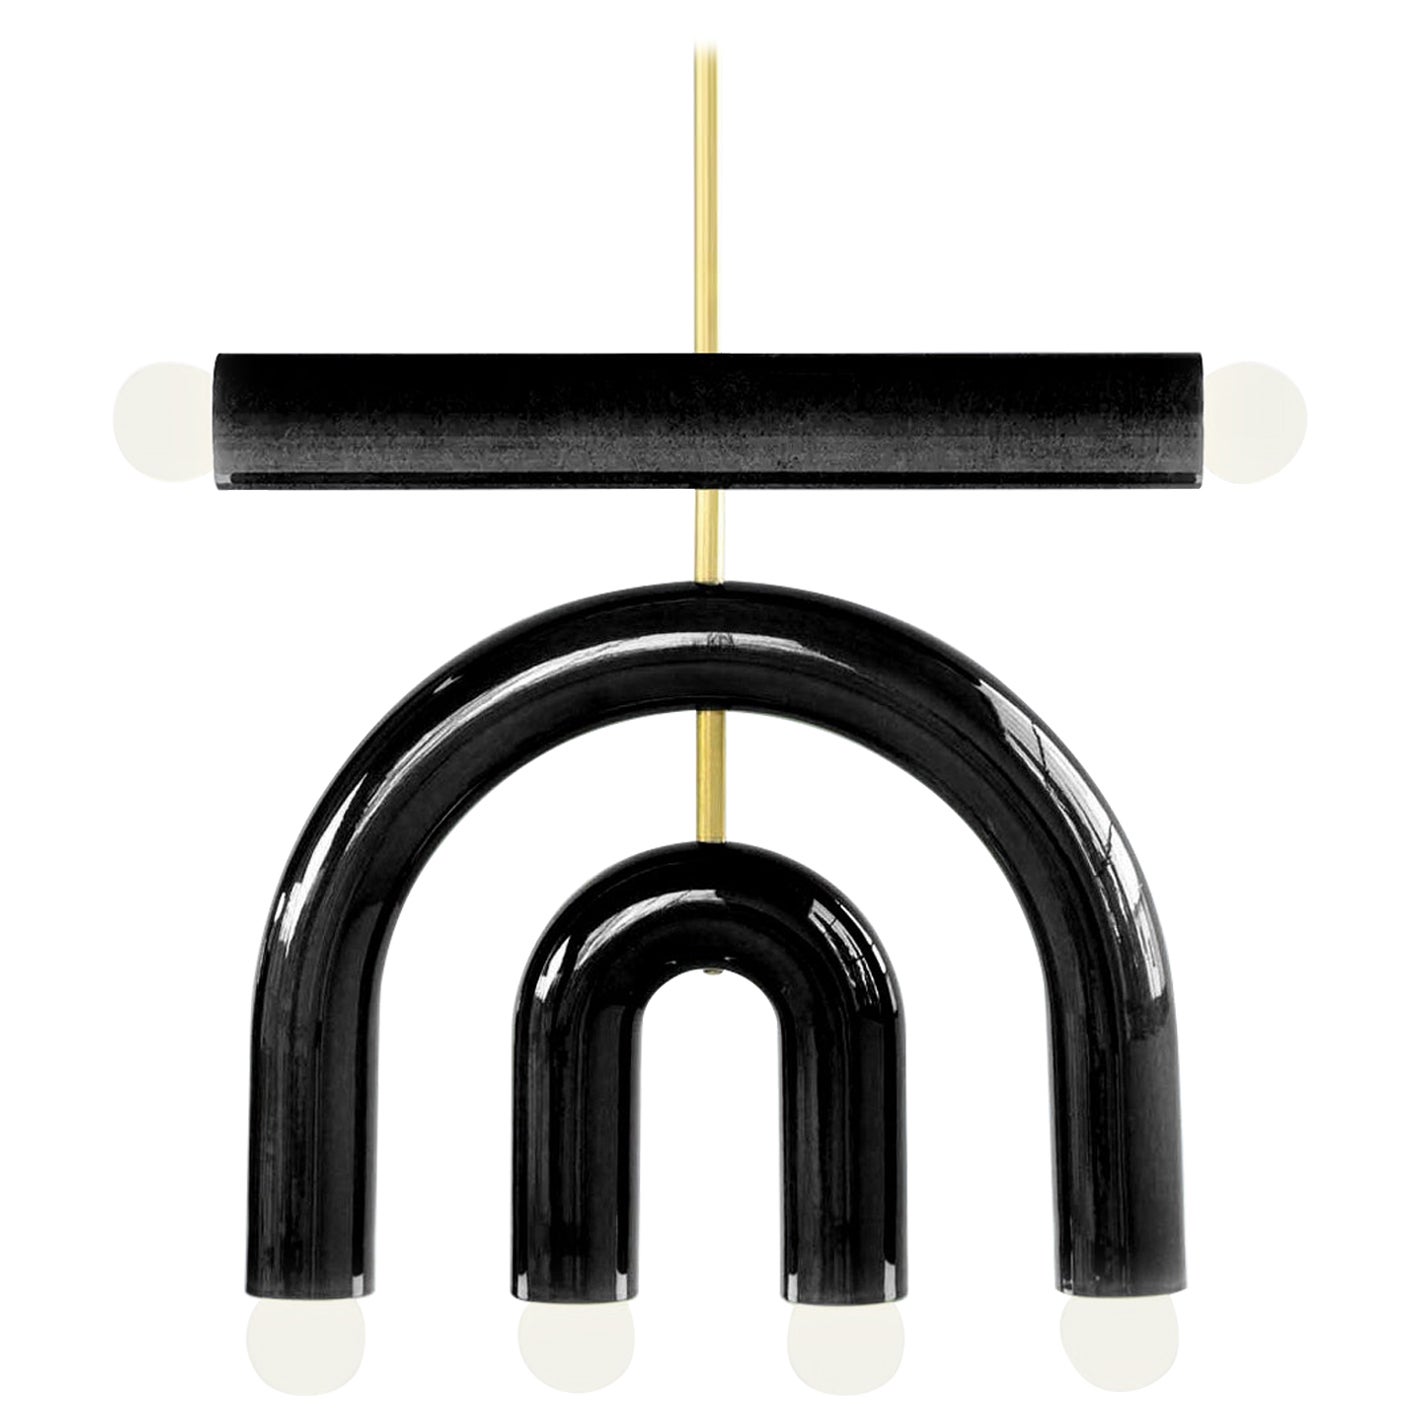 Ceramic Pendant Lamp 'TRN D1' by Pani Jurek, Green, Black and Ochre In New Condition For Sale In Paris, FR